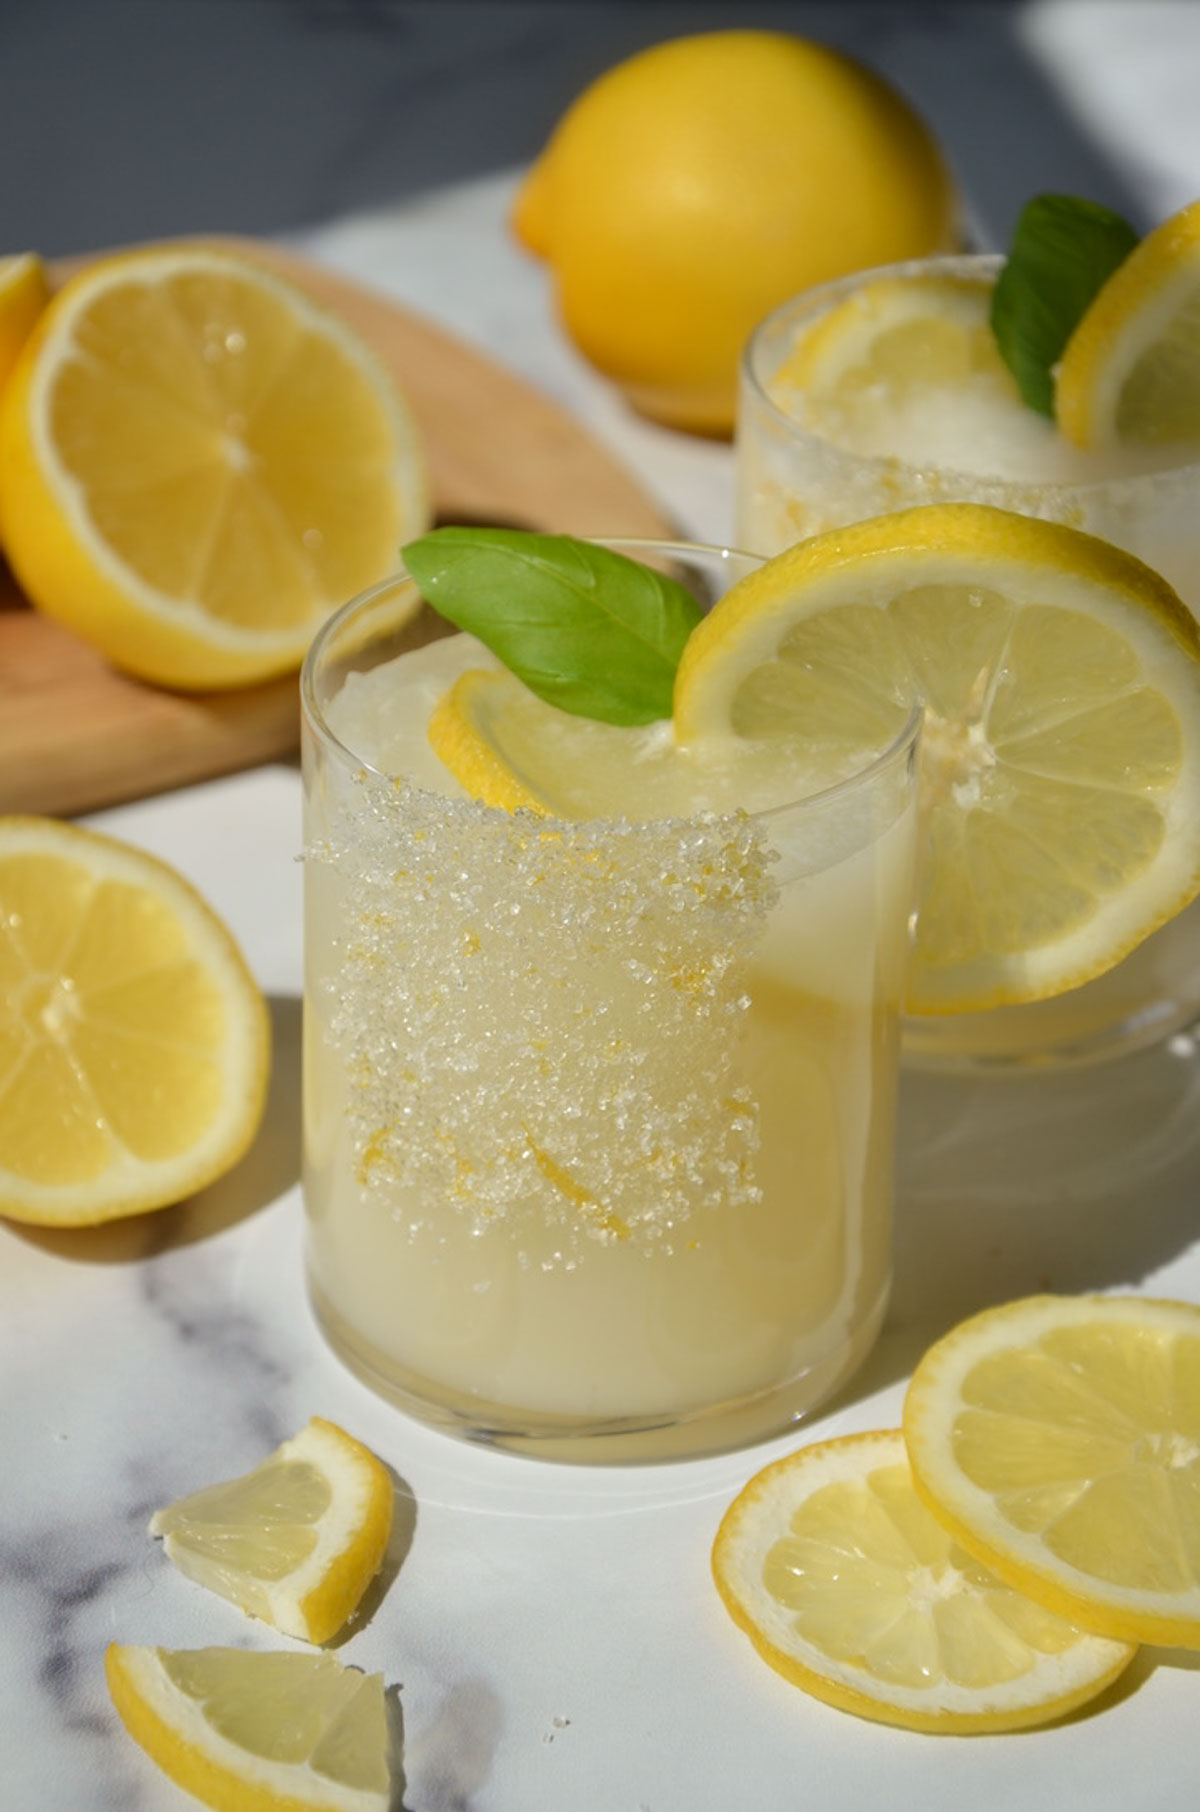 A glass of creamy lemonade on the table with a lemon wheel on the rim and around the glass.